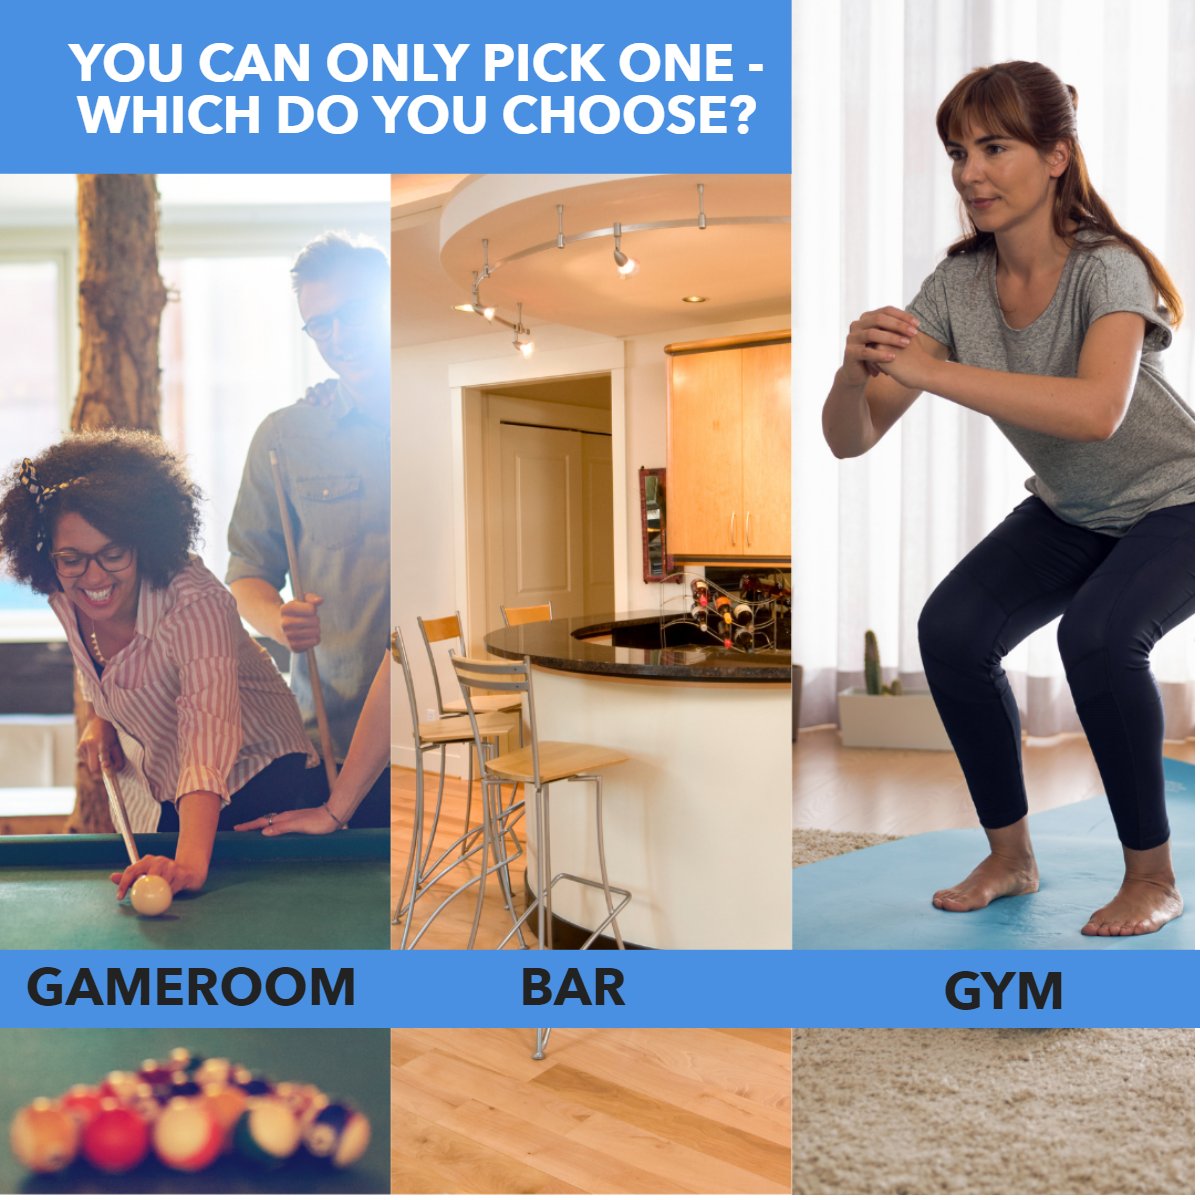 Extra room in your home? If you could only pick one, which would you choose?

1. Game Room
2. Bar
3. Home Gym

Let us know in the comments! 💭
#swflrealtor #swflrealestate #floridarealestate #florida #newconstruction #homebuying #homebuyingprocess #homebuyingtips